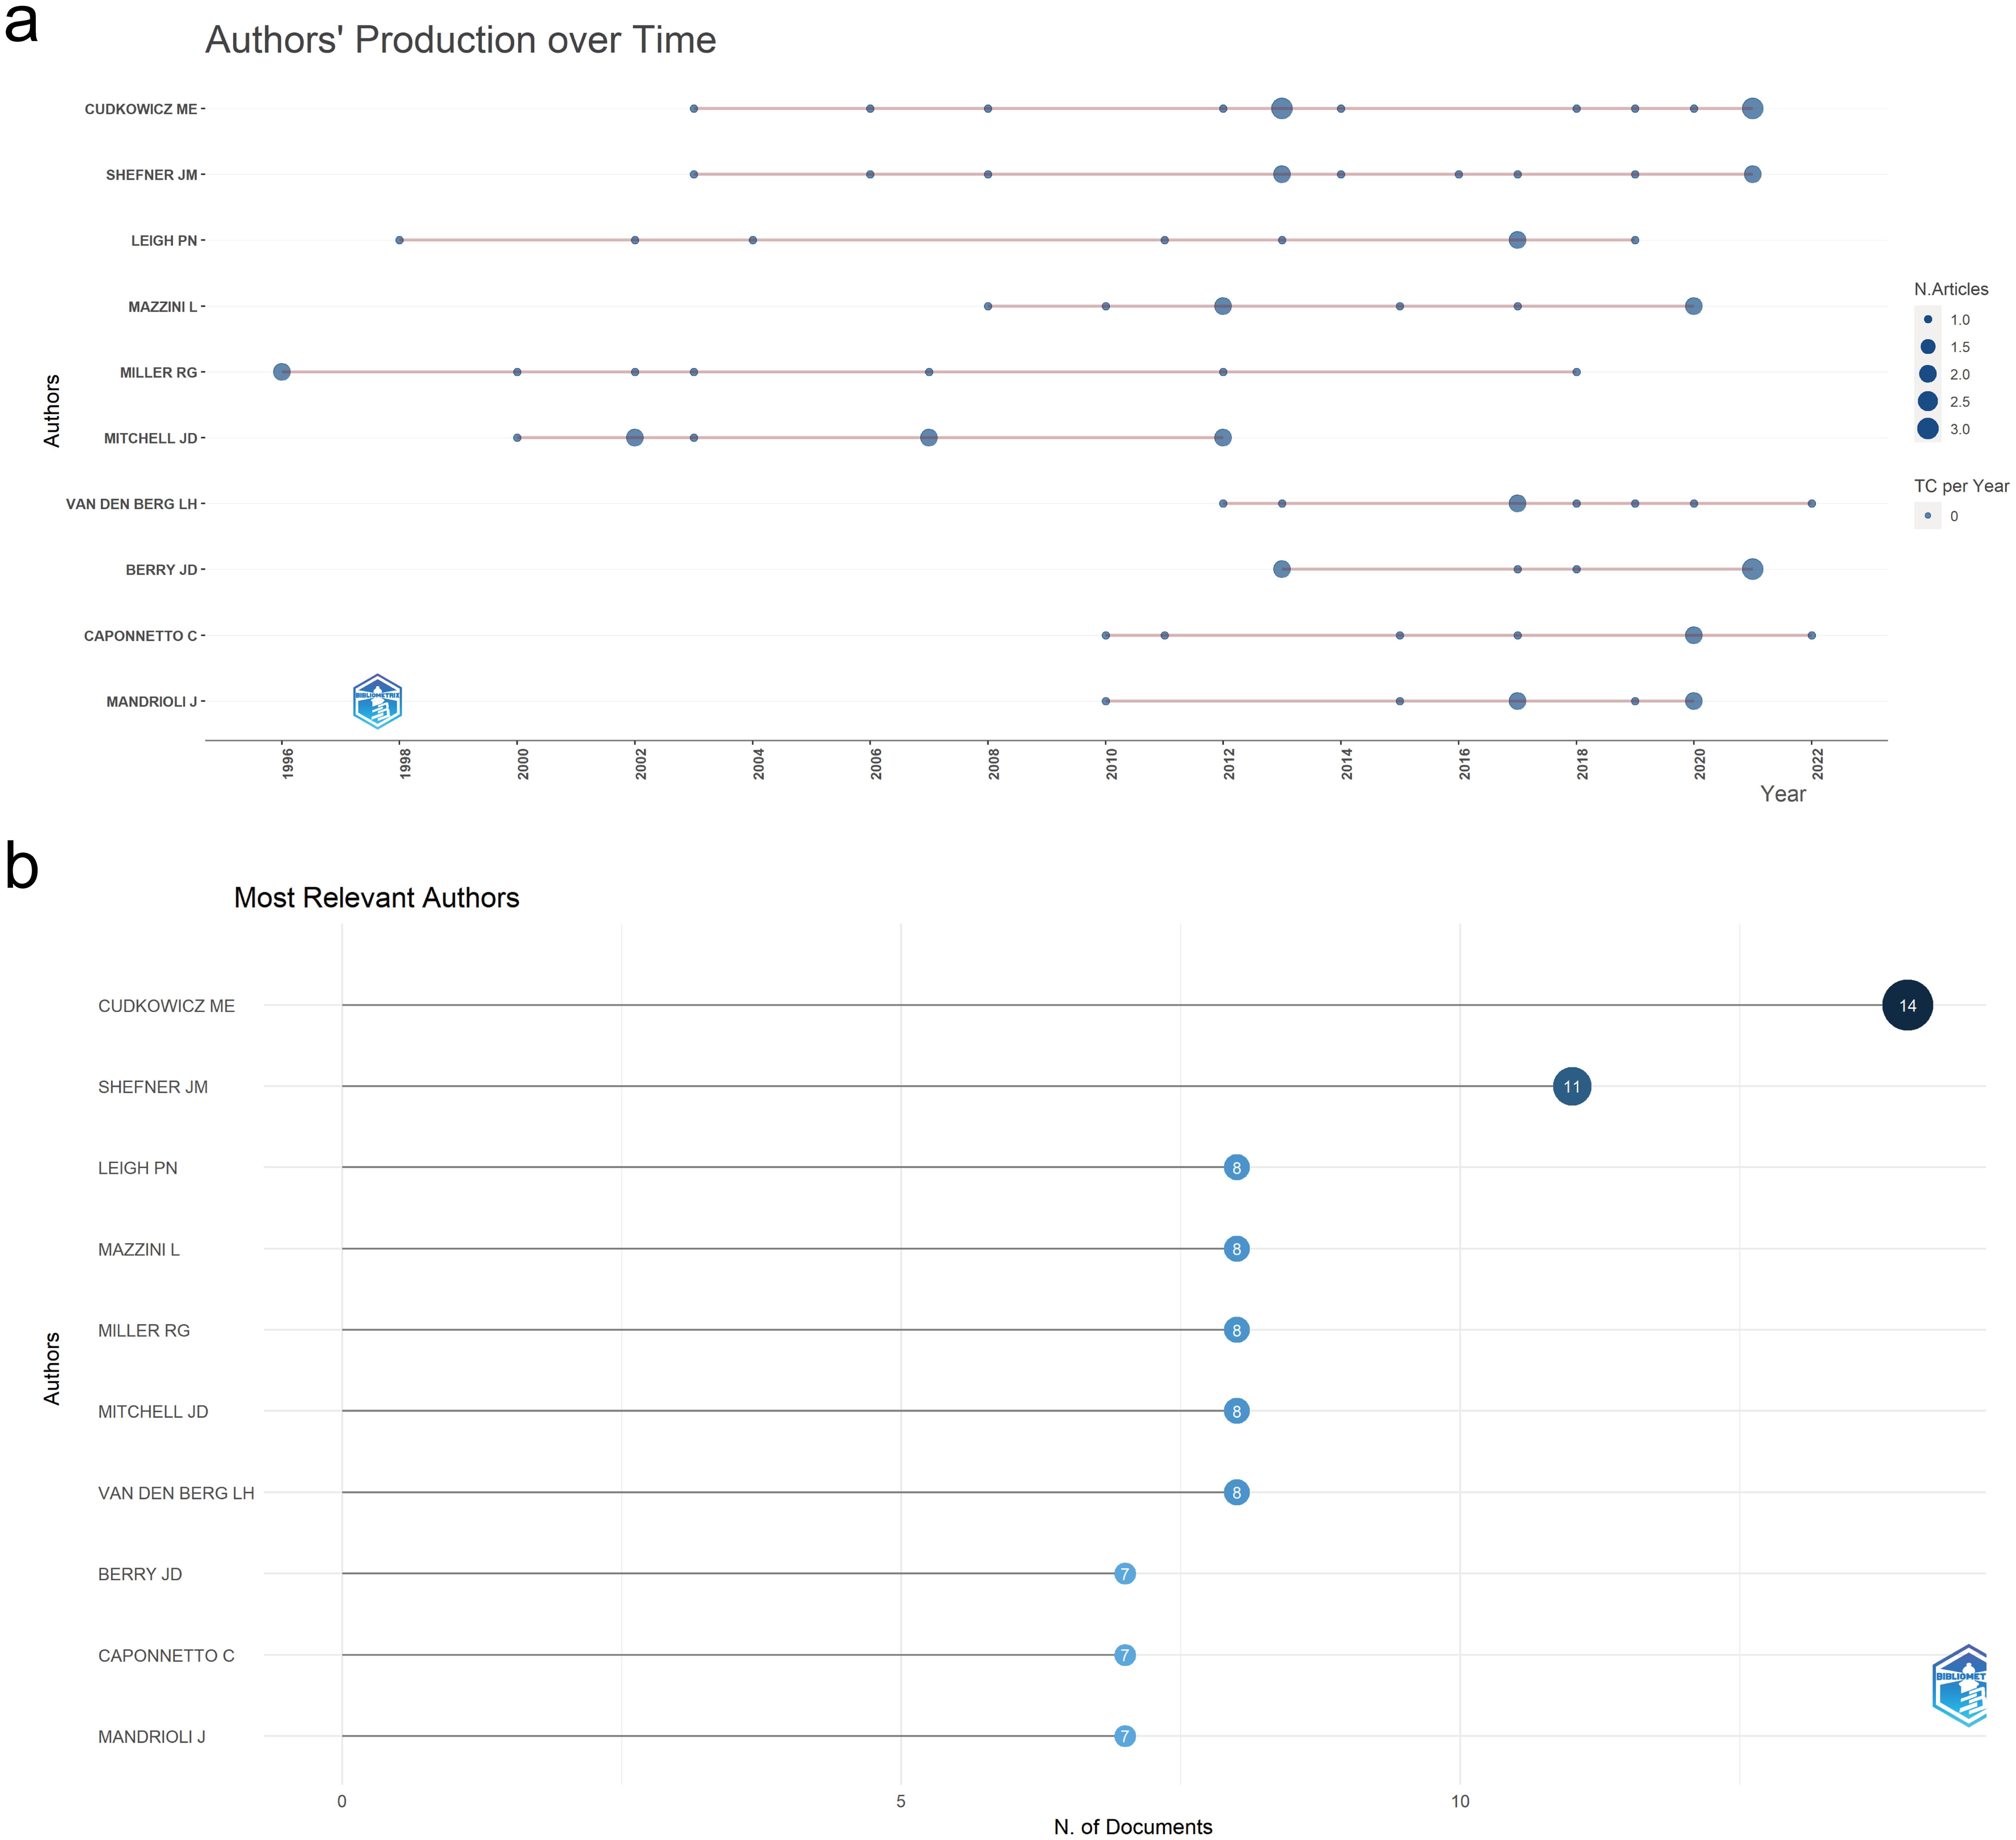 Authors’ production over time (a) and most relevant authors (b) of amyotrophic lateral sclerosis studies.